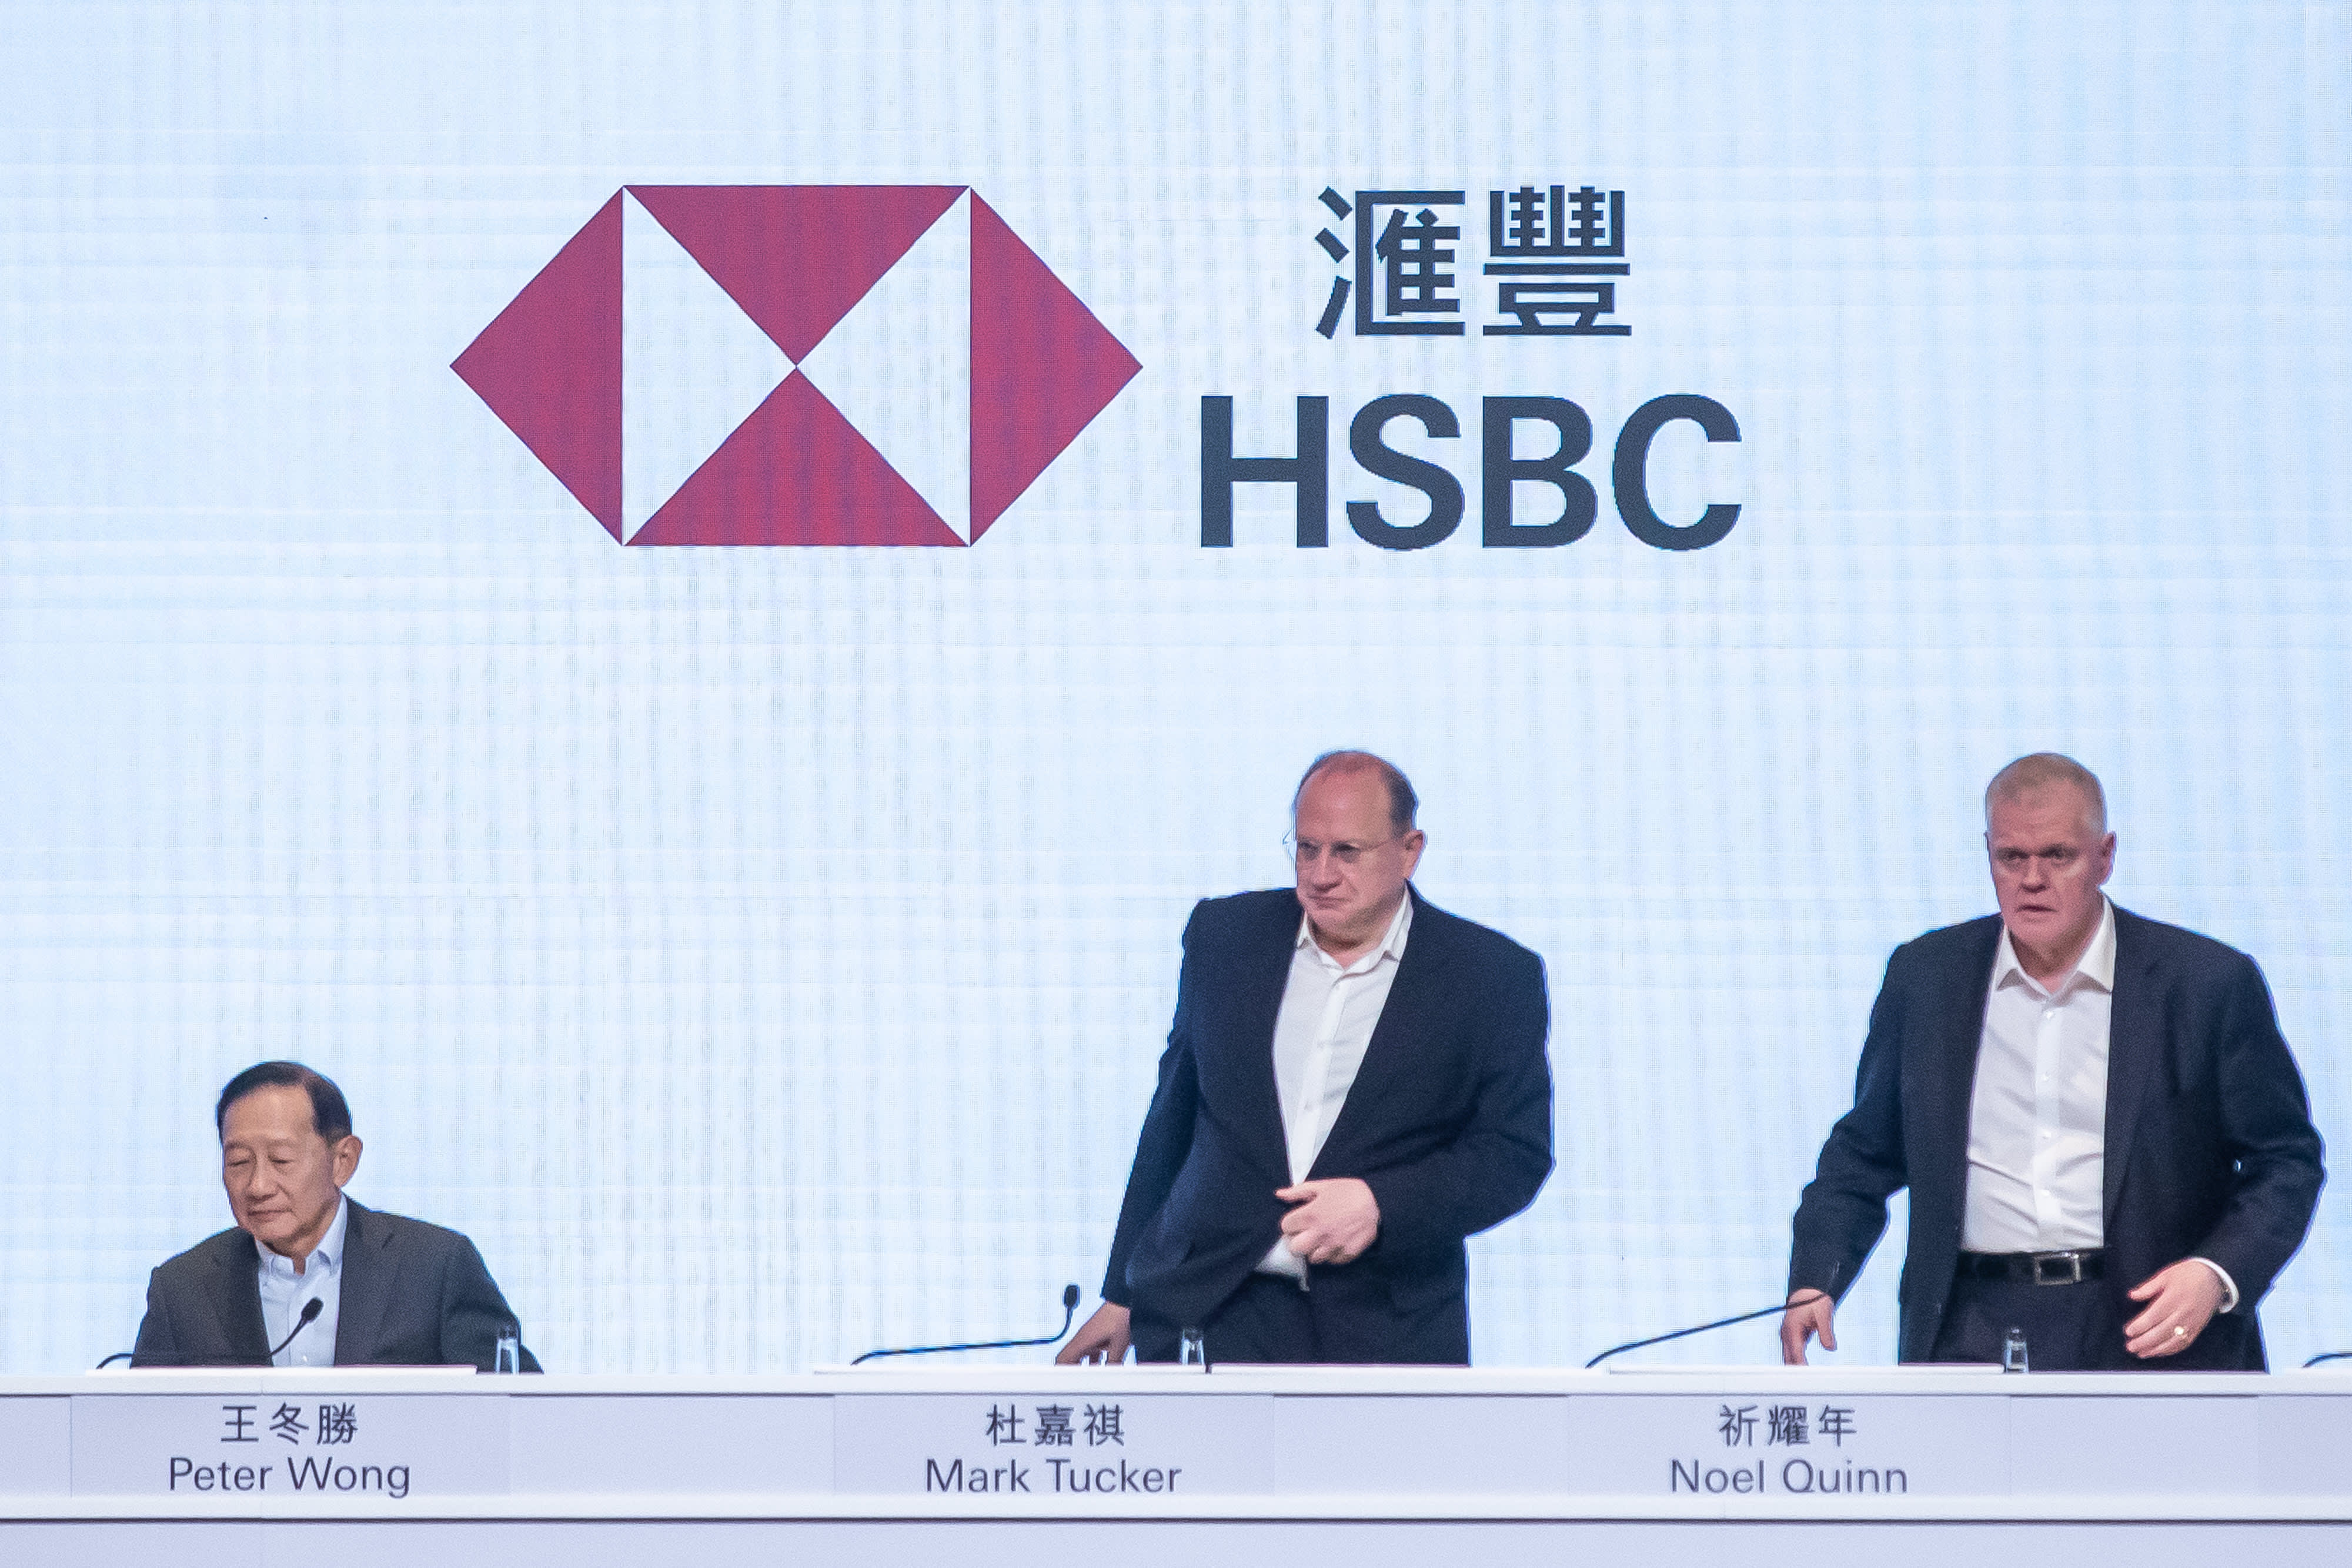 HSBC shareholders will vote on the spinoff proposal at the annual meeting